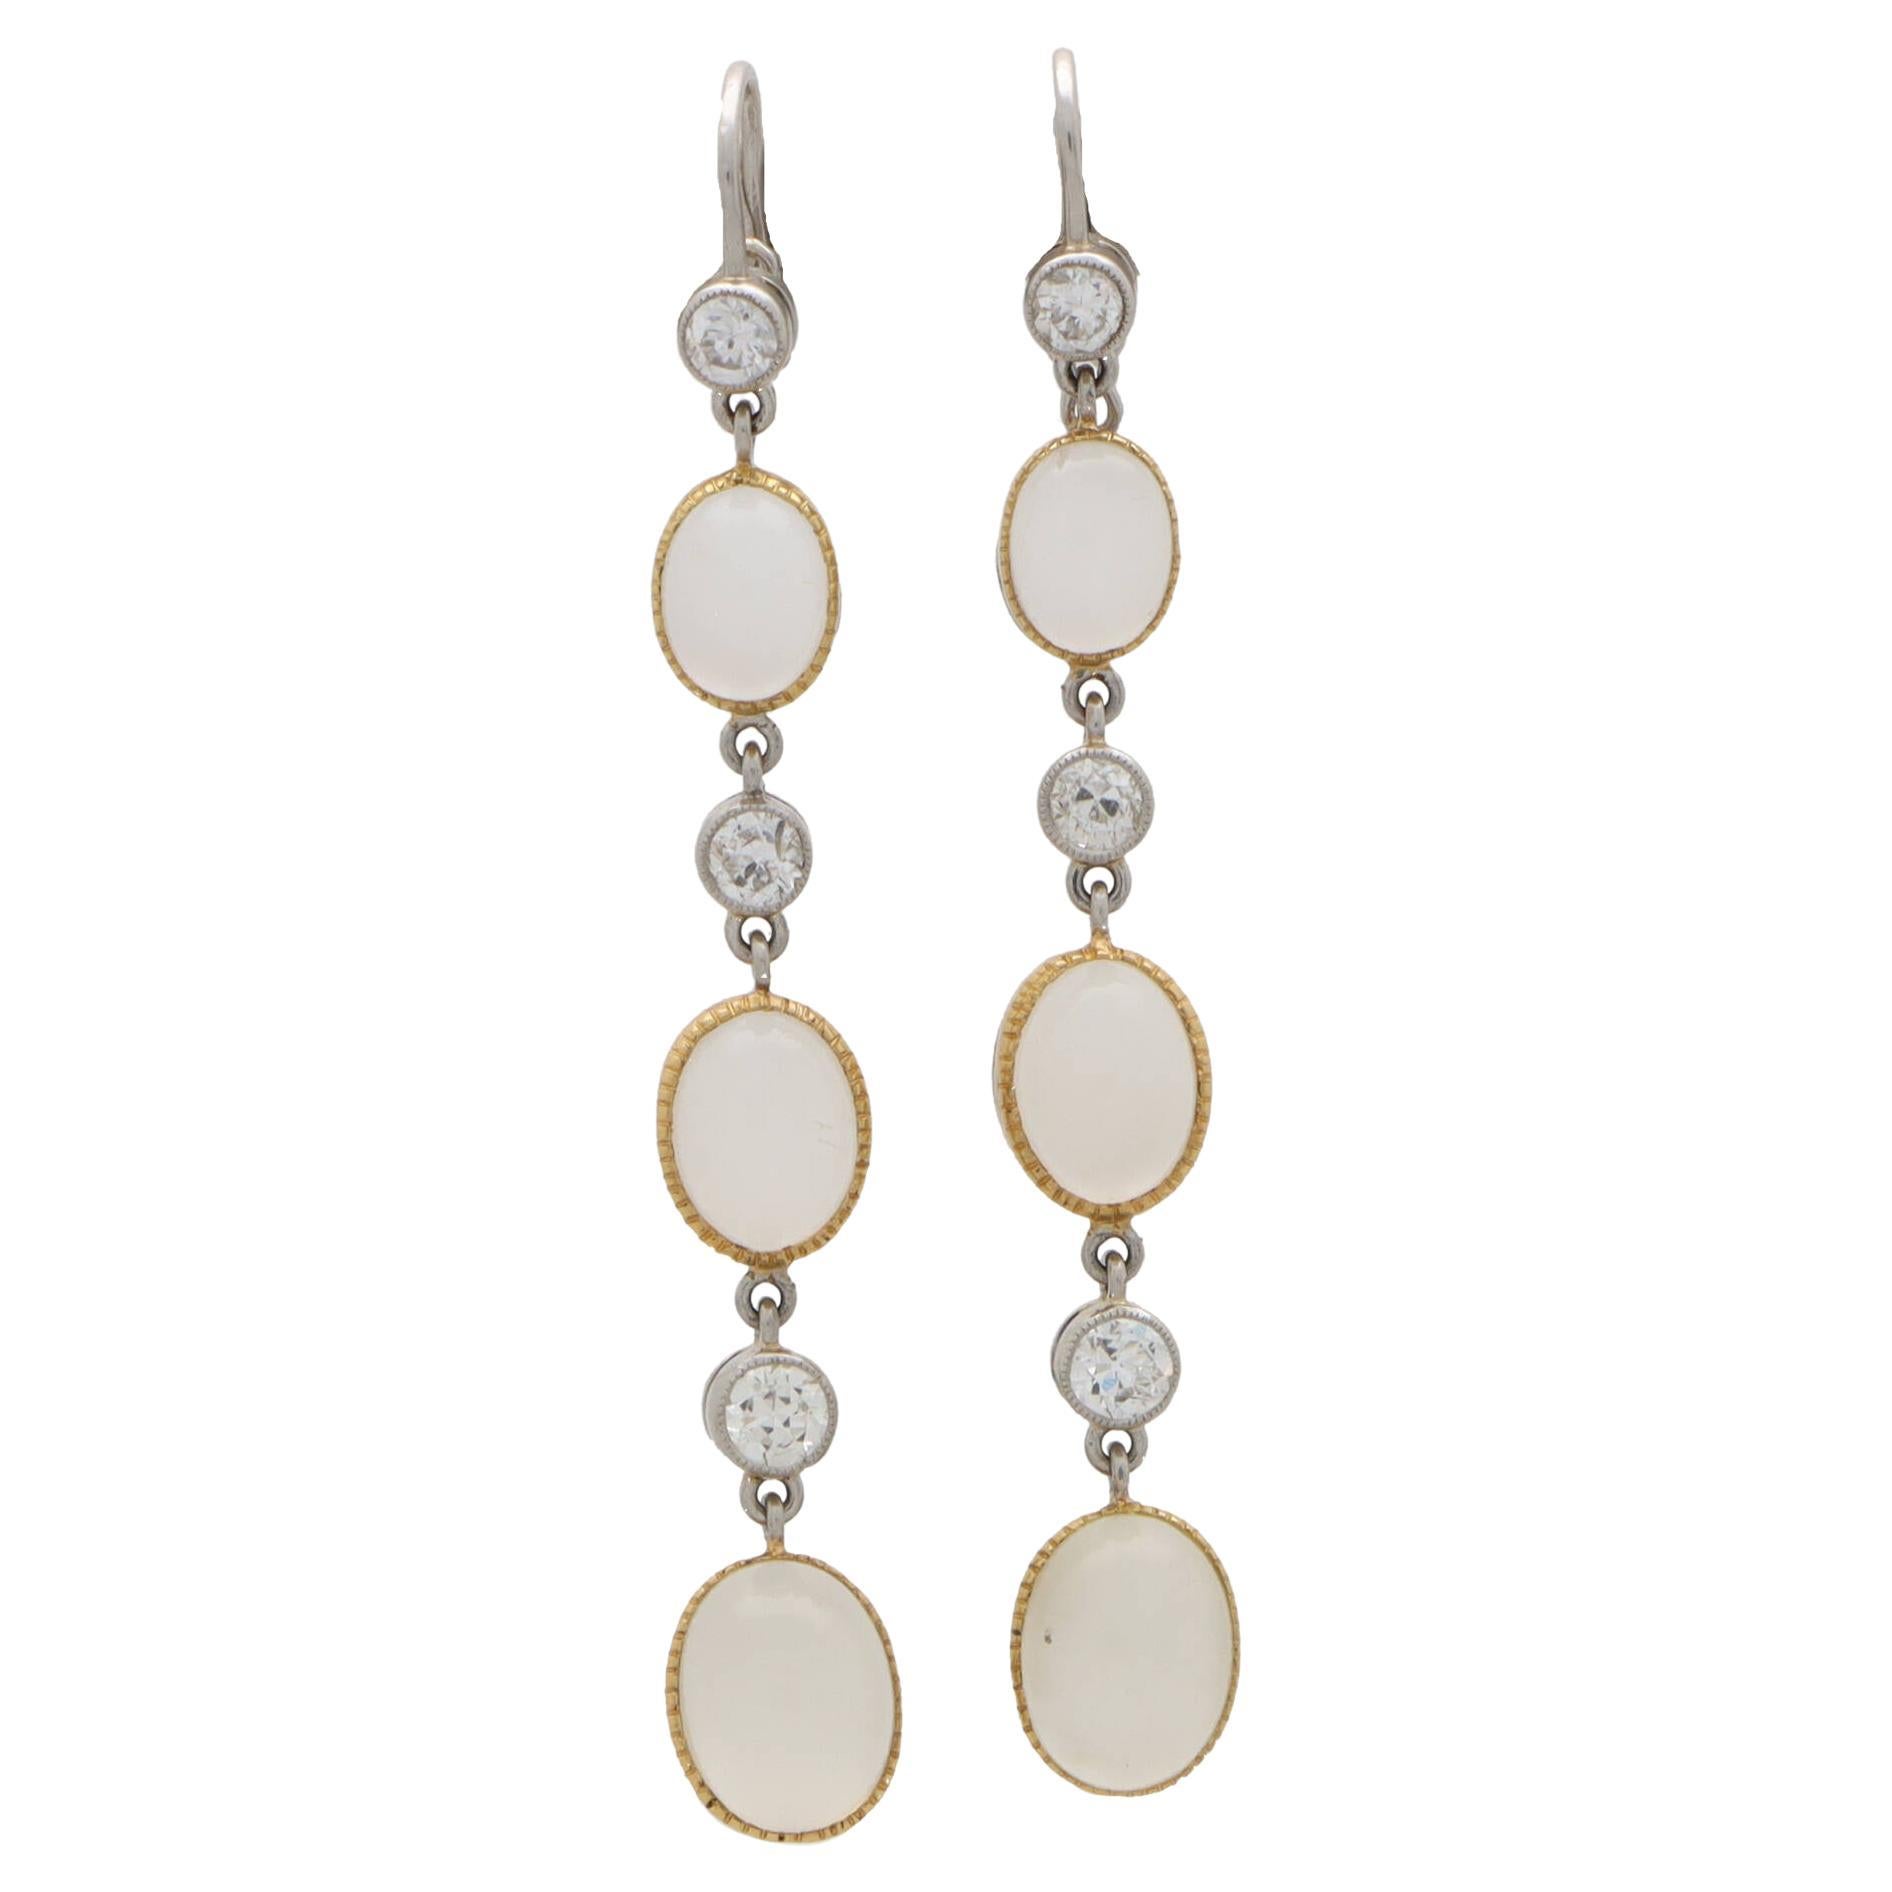 Victorian Inspired Moonstone and Diamond Drop Earrings